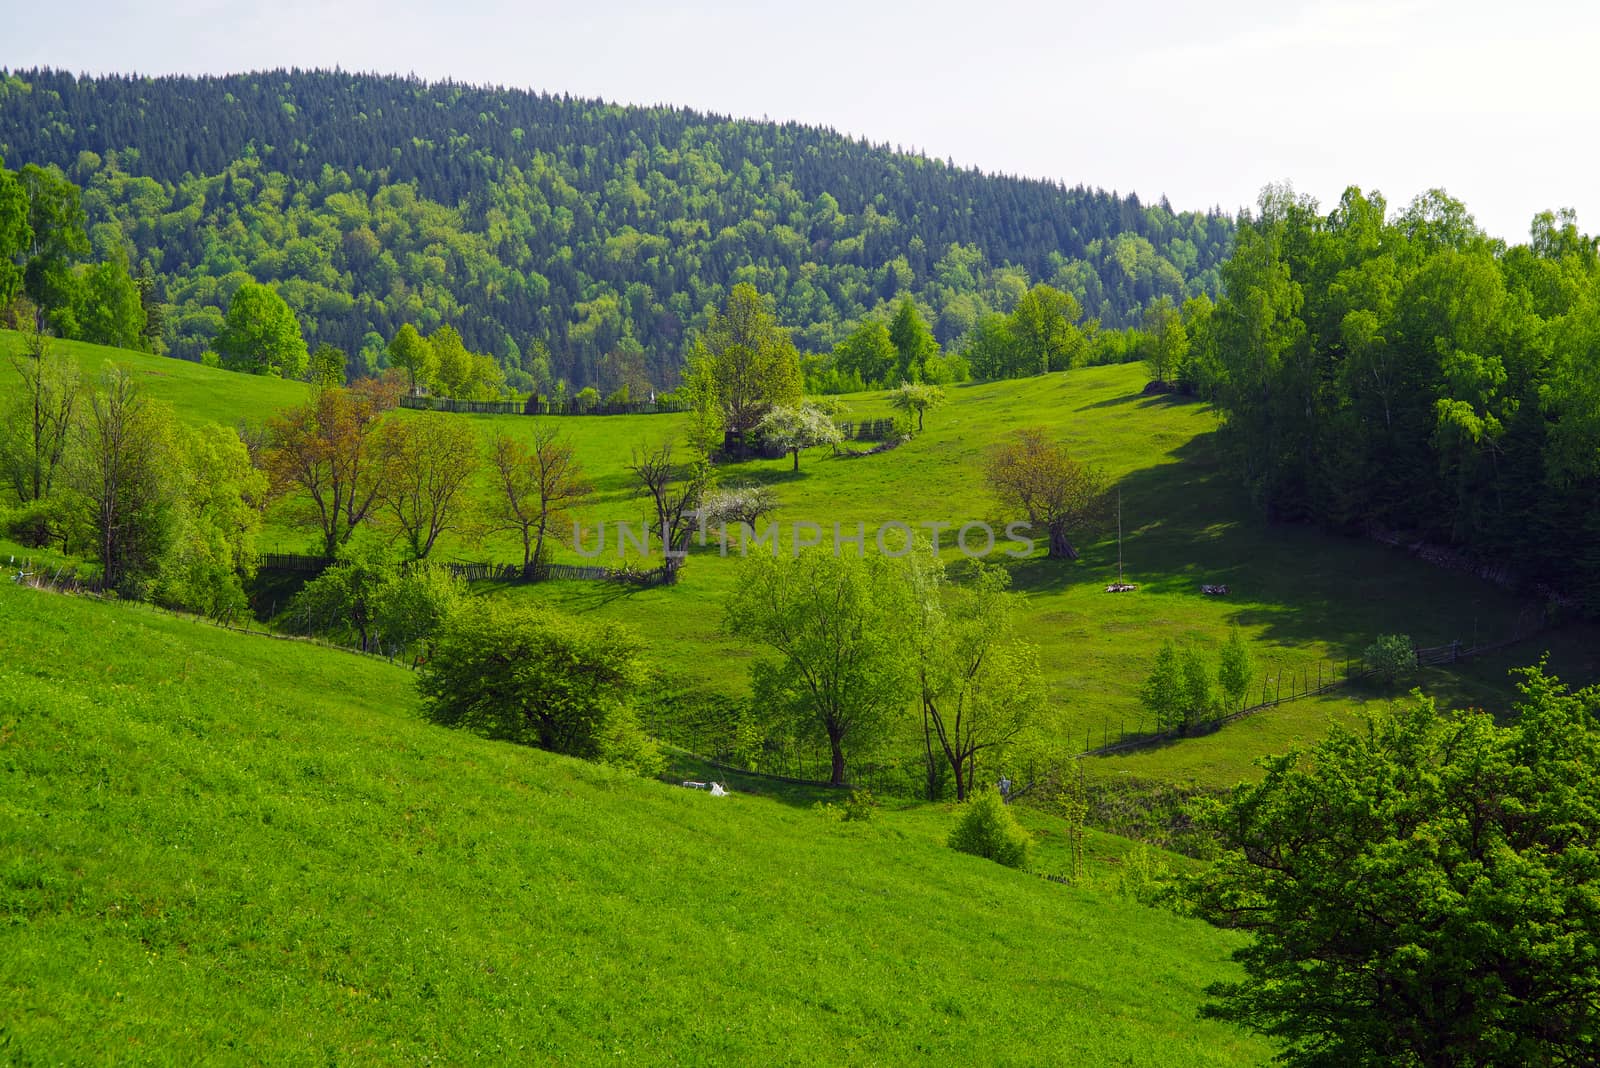 Spring meadow on the hill, young green grass and trees